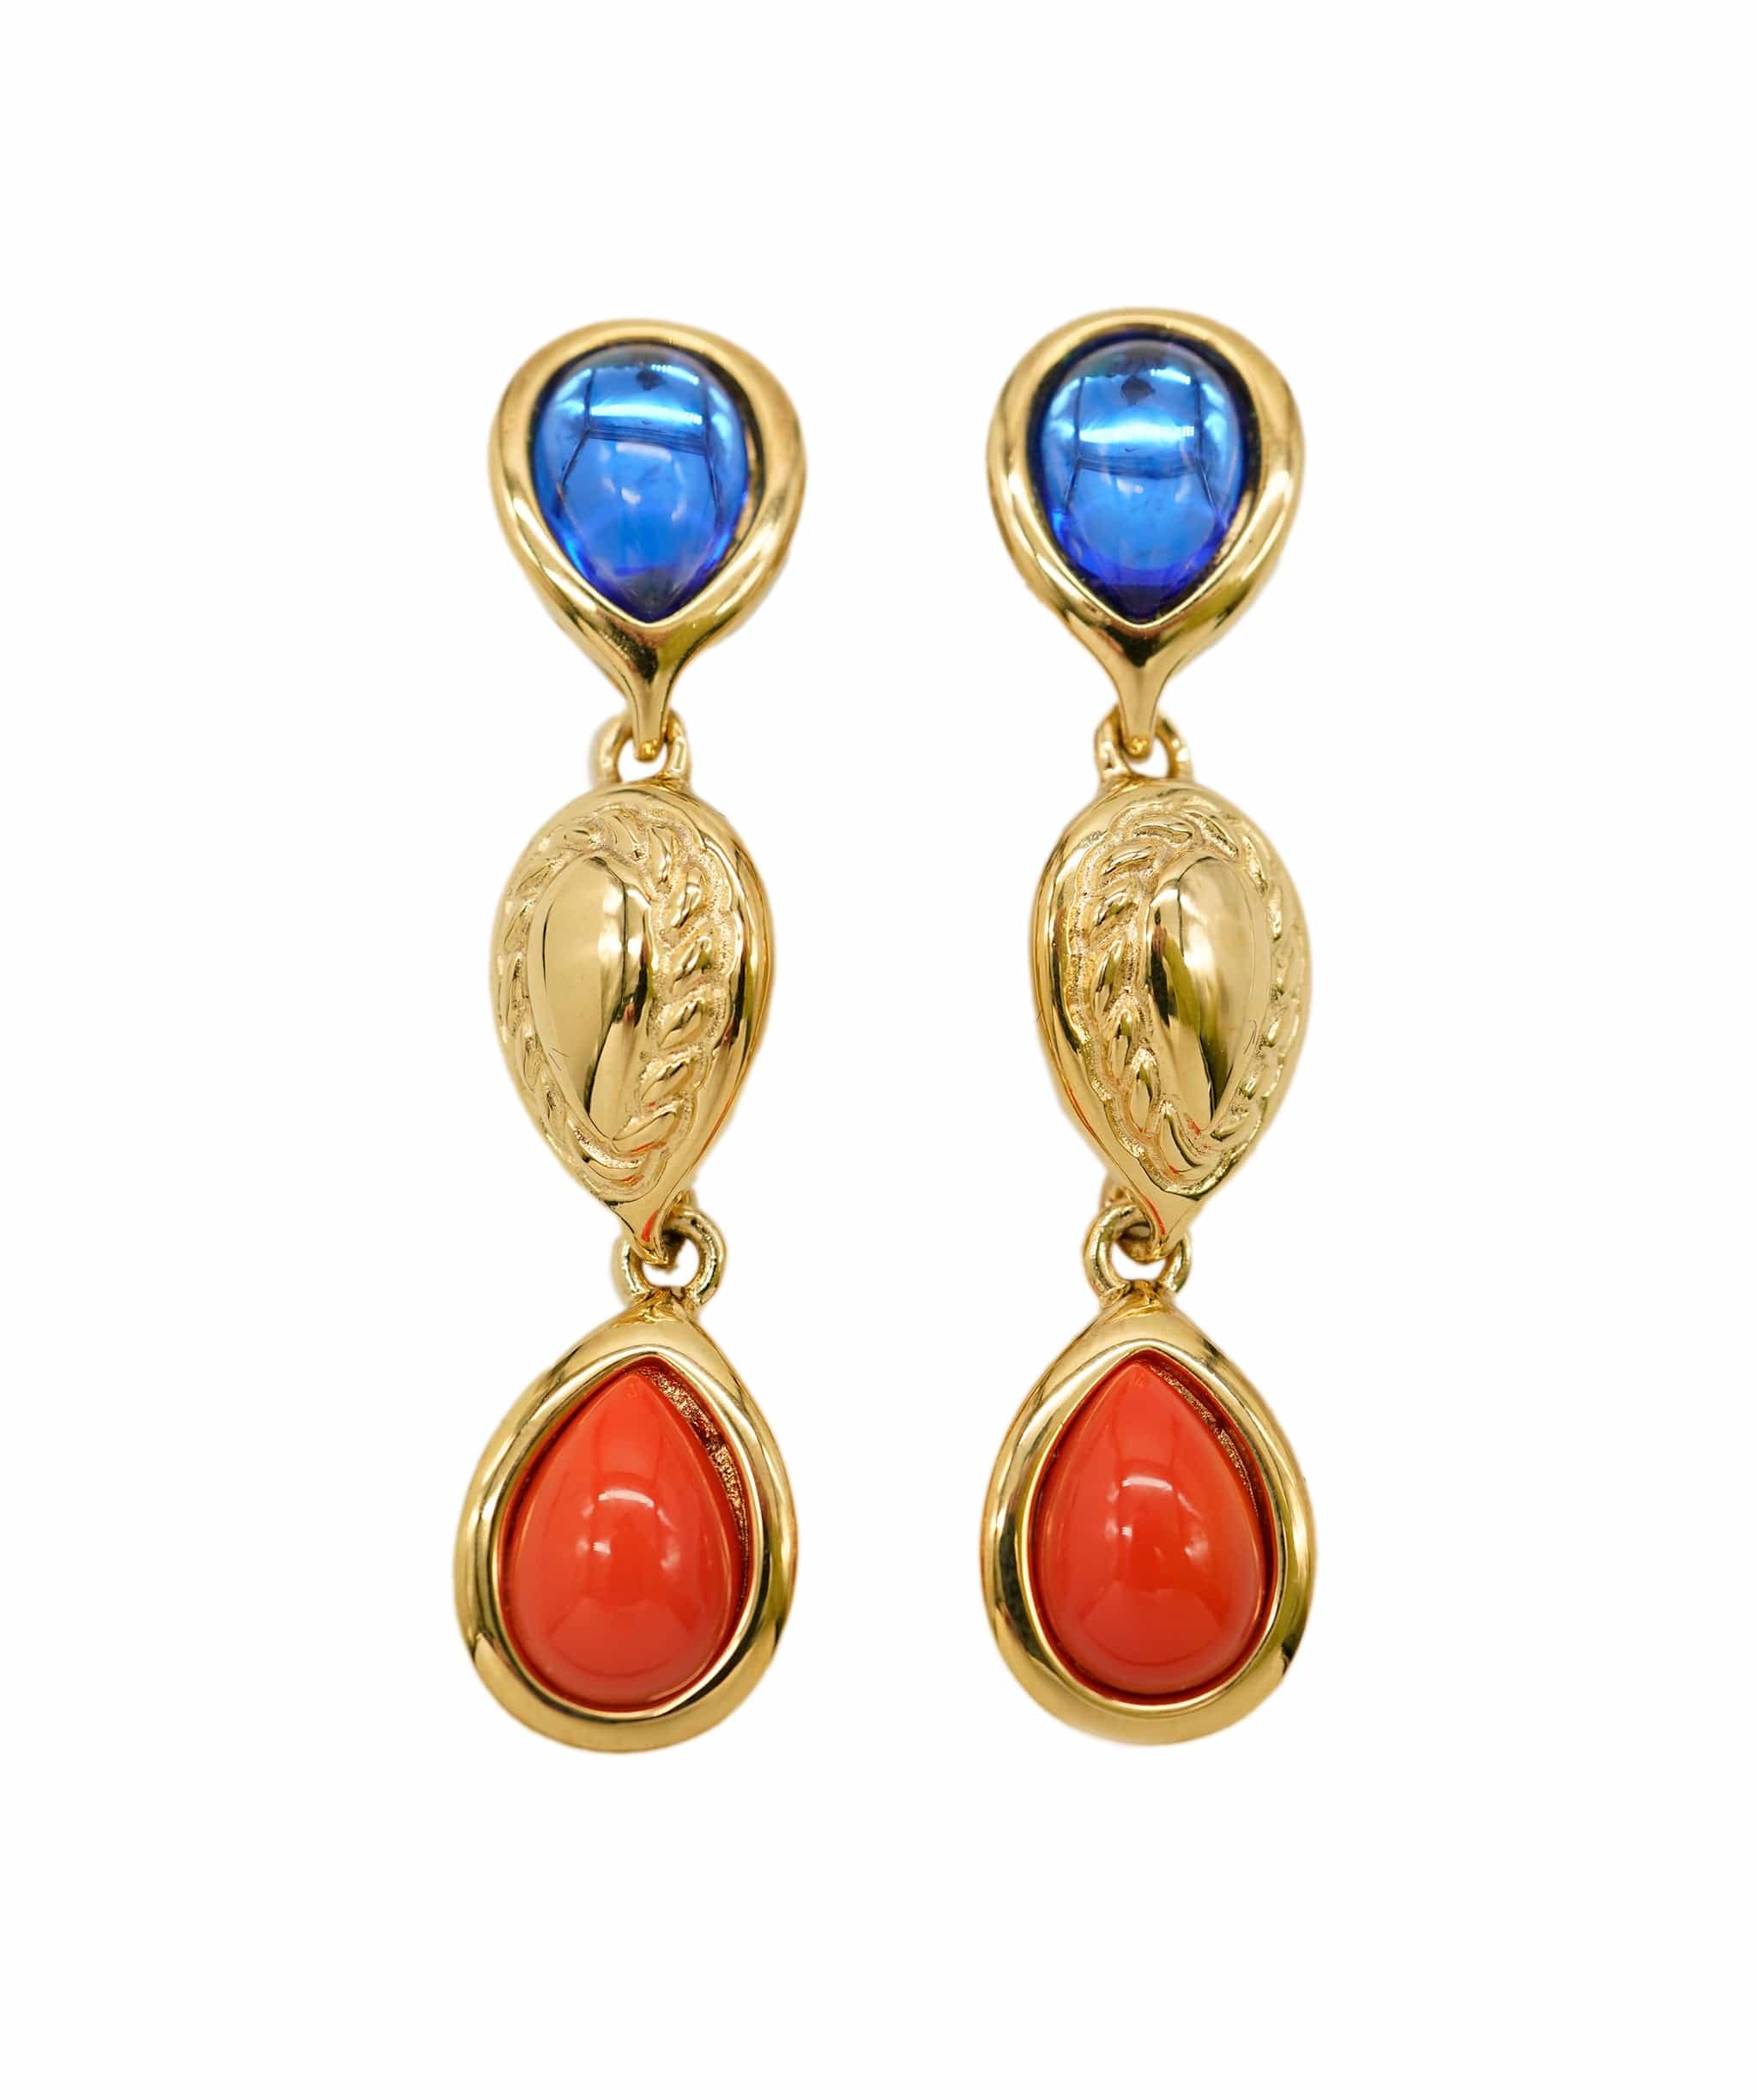 Givenchy Givenchy colourful drop clips AEL1143